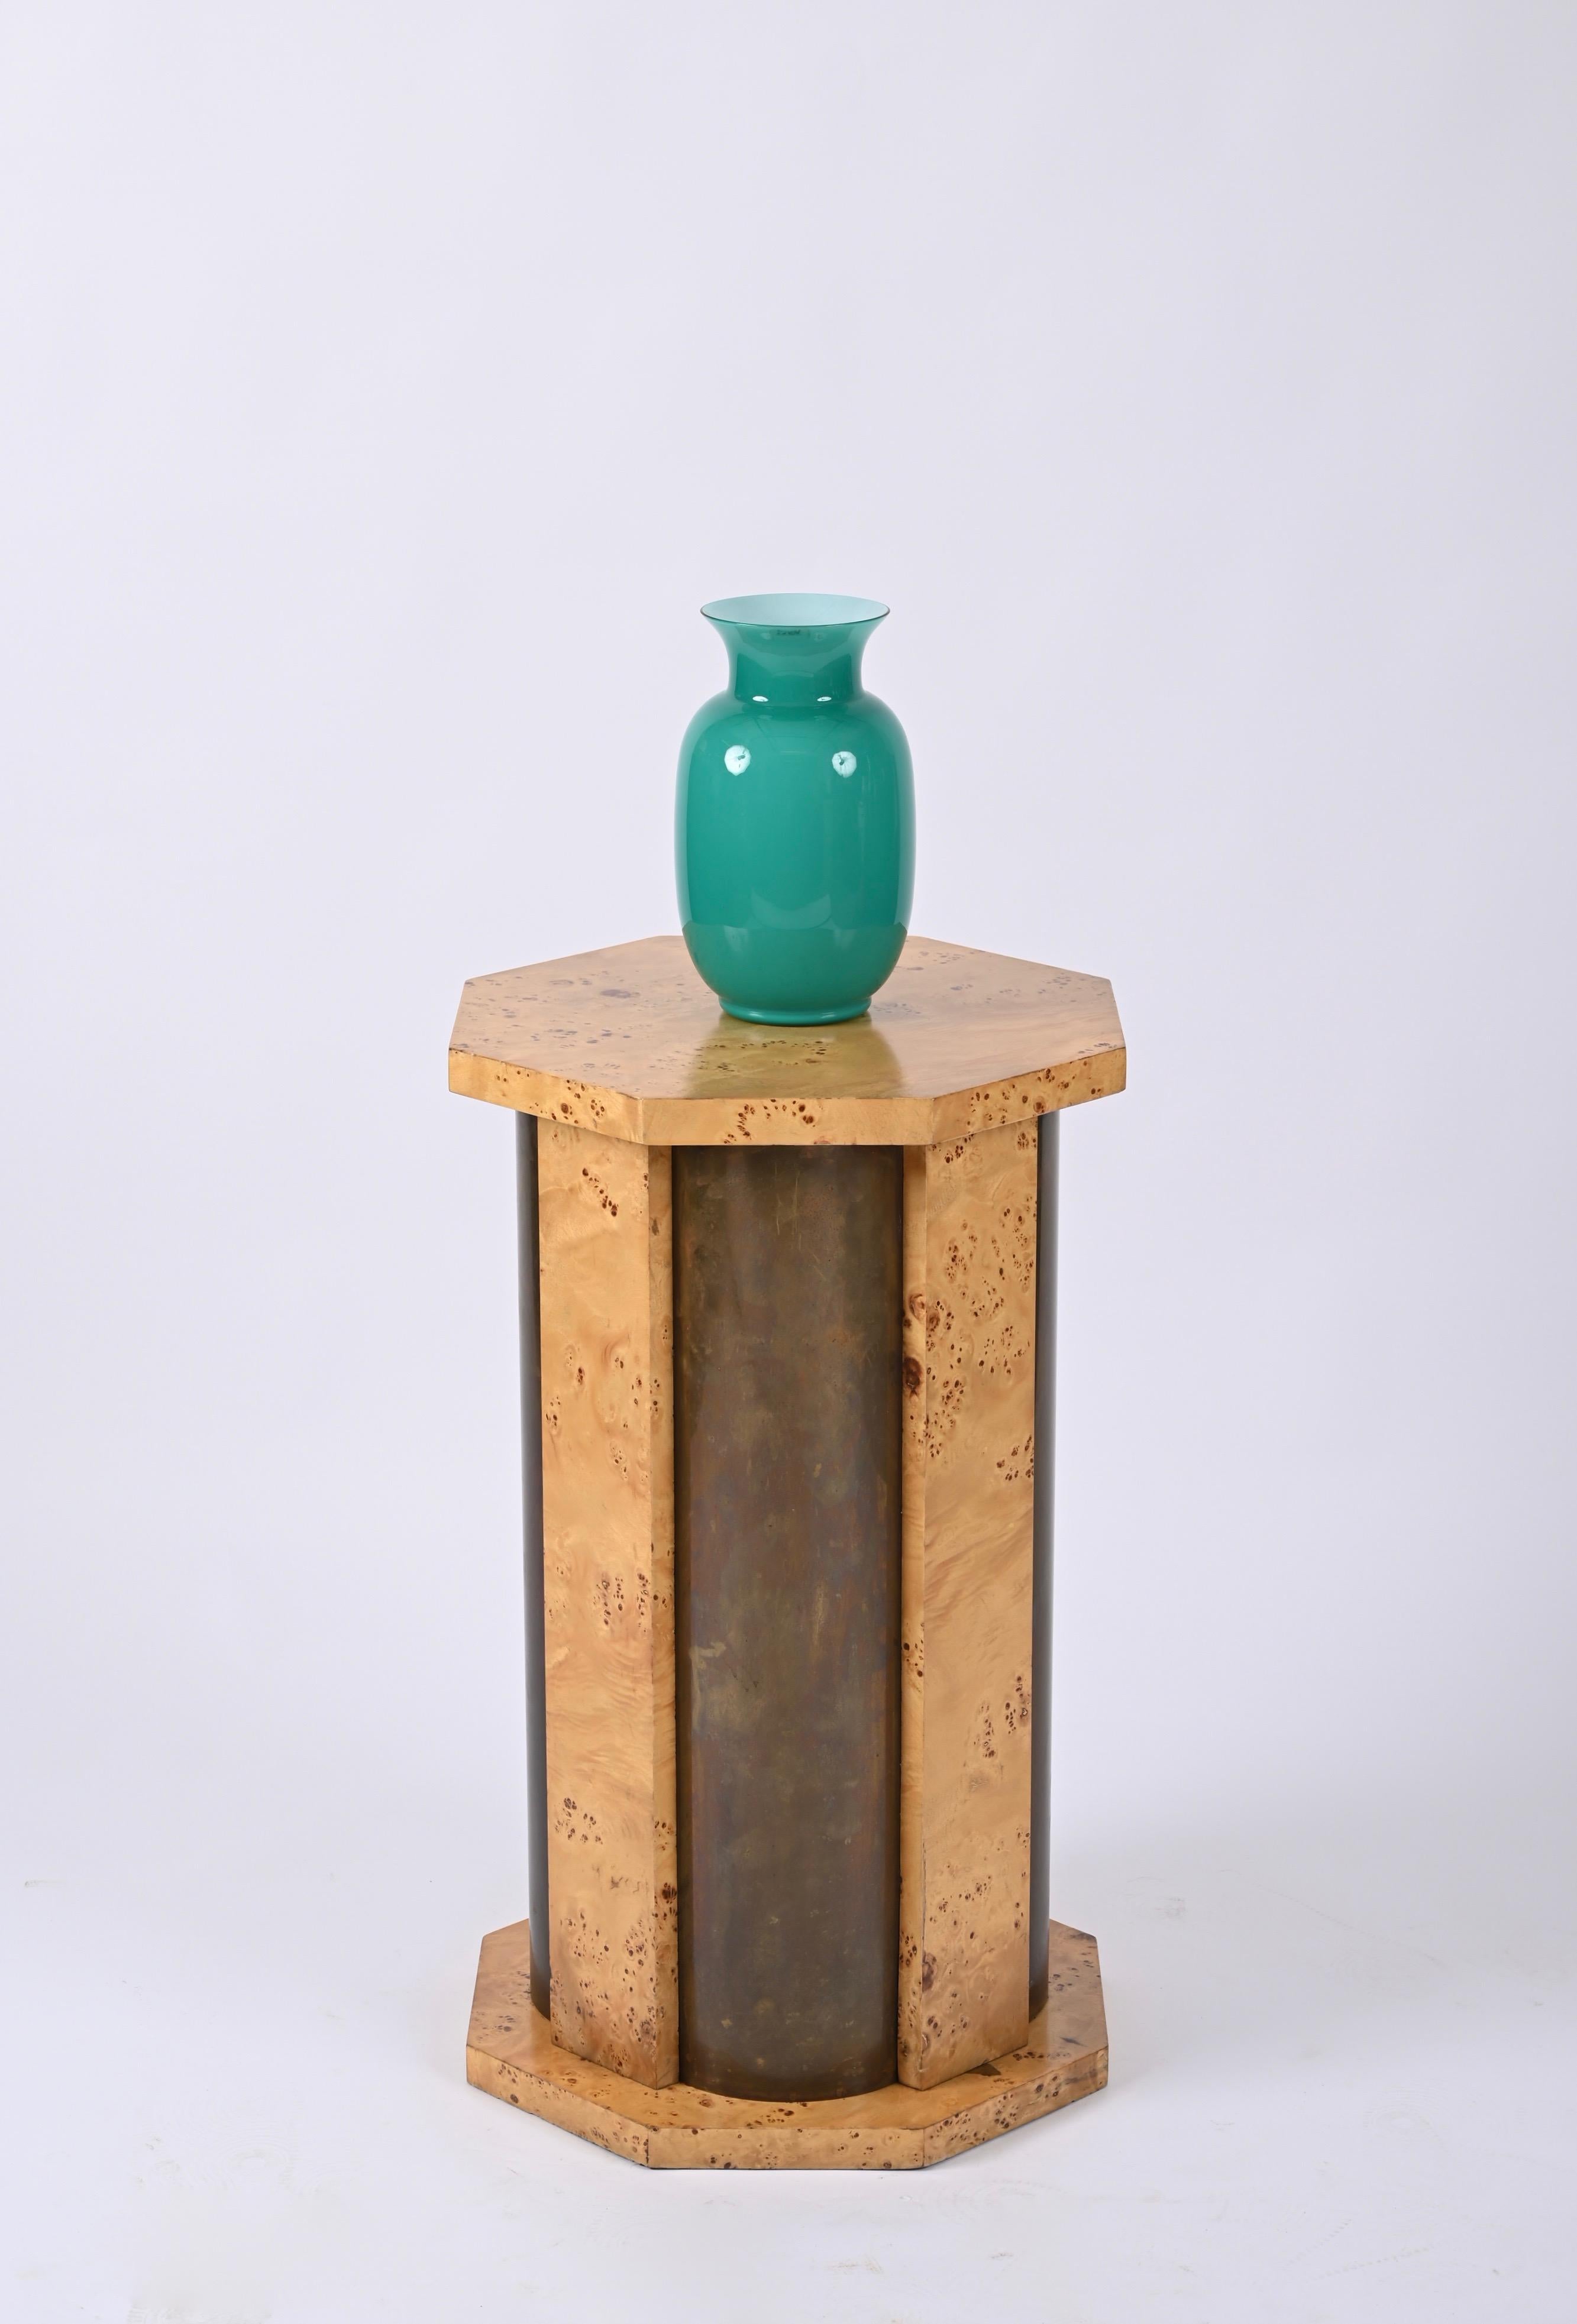 Tommaso Barbi Octagonal Table Pedestal in Burl Wood and Brass, Italy, 1970 For Sale 10